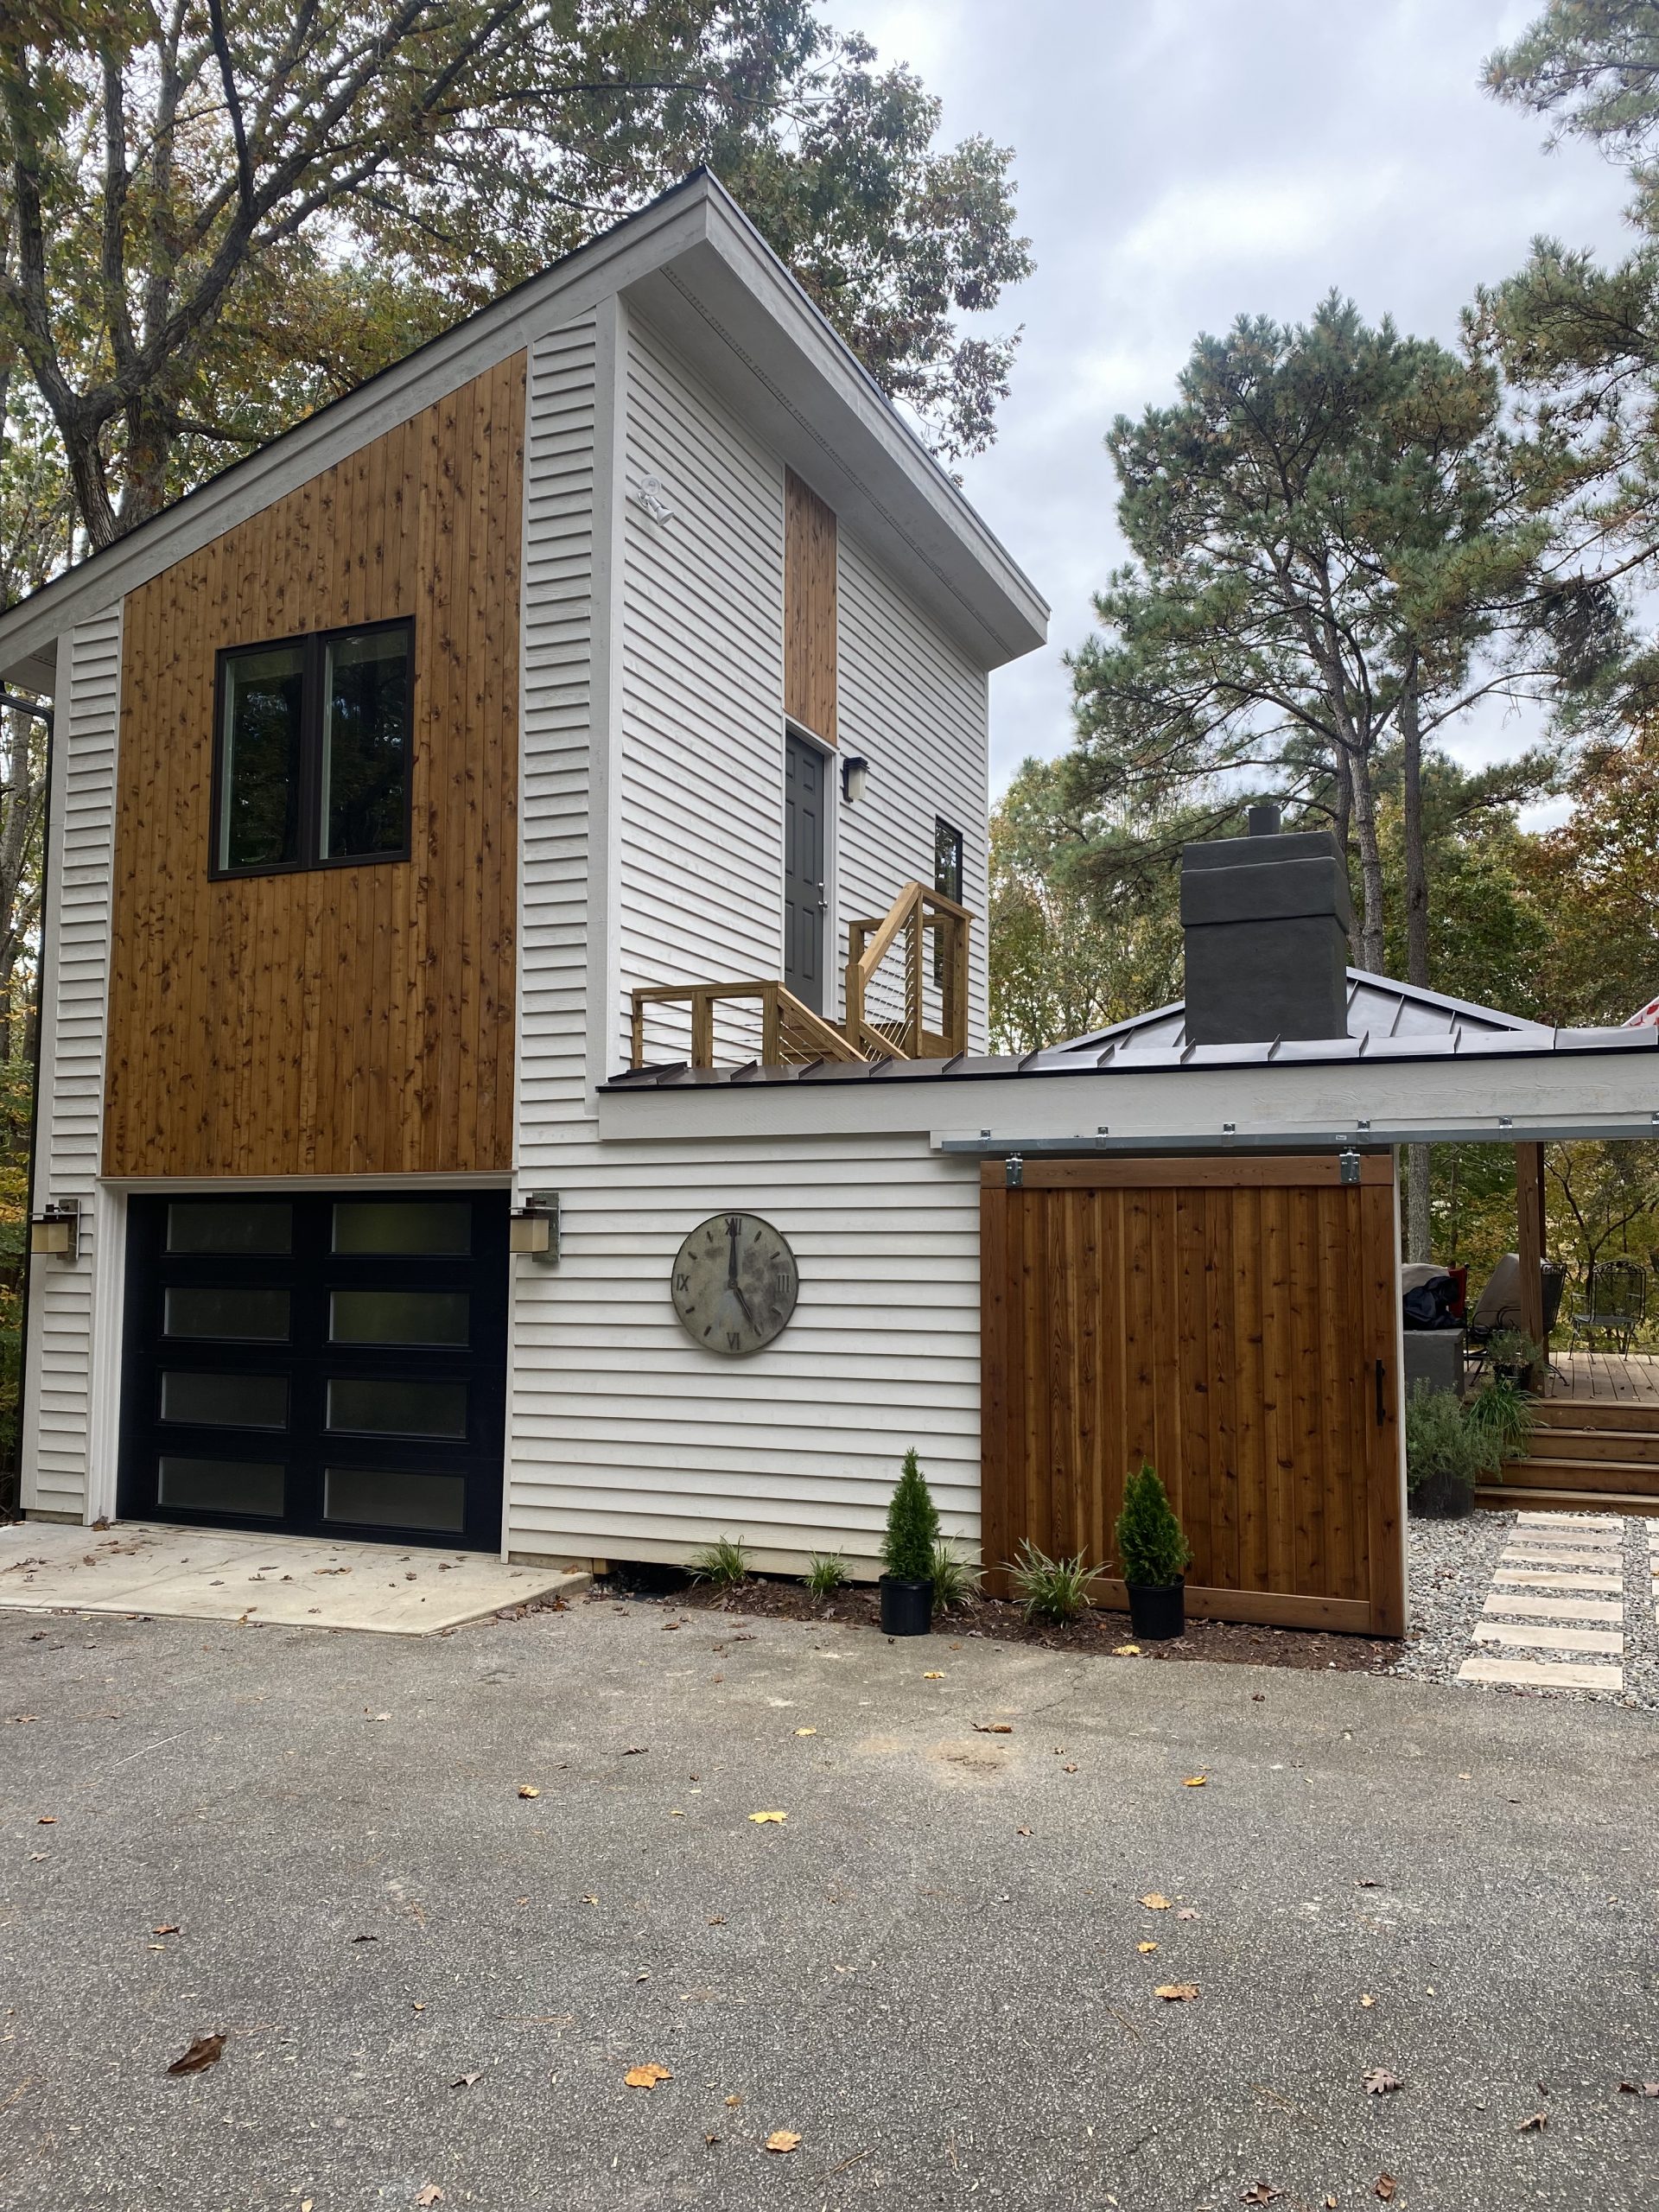 Single car garage with studio apartment above with steps to grade and a privacy wall connecting the main house to the new addition